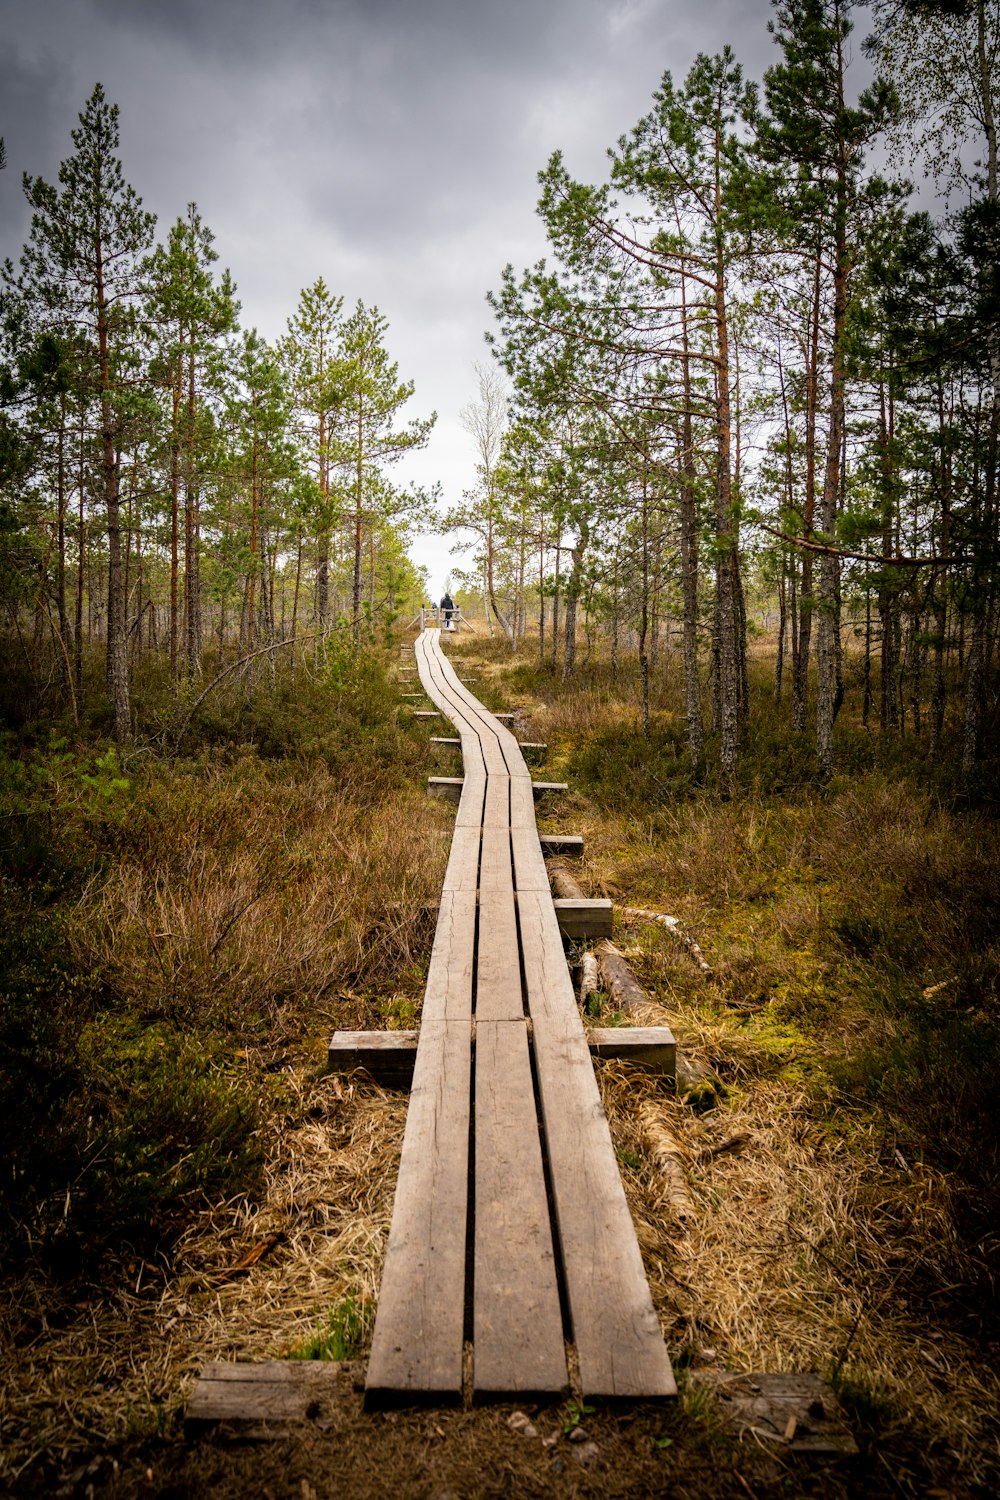 a wooden path in the middle of a forest